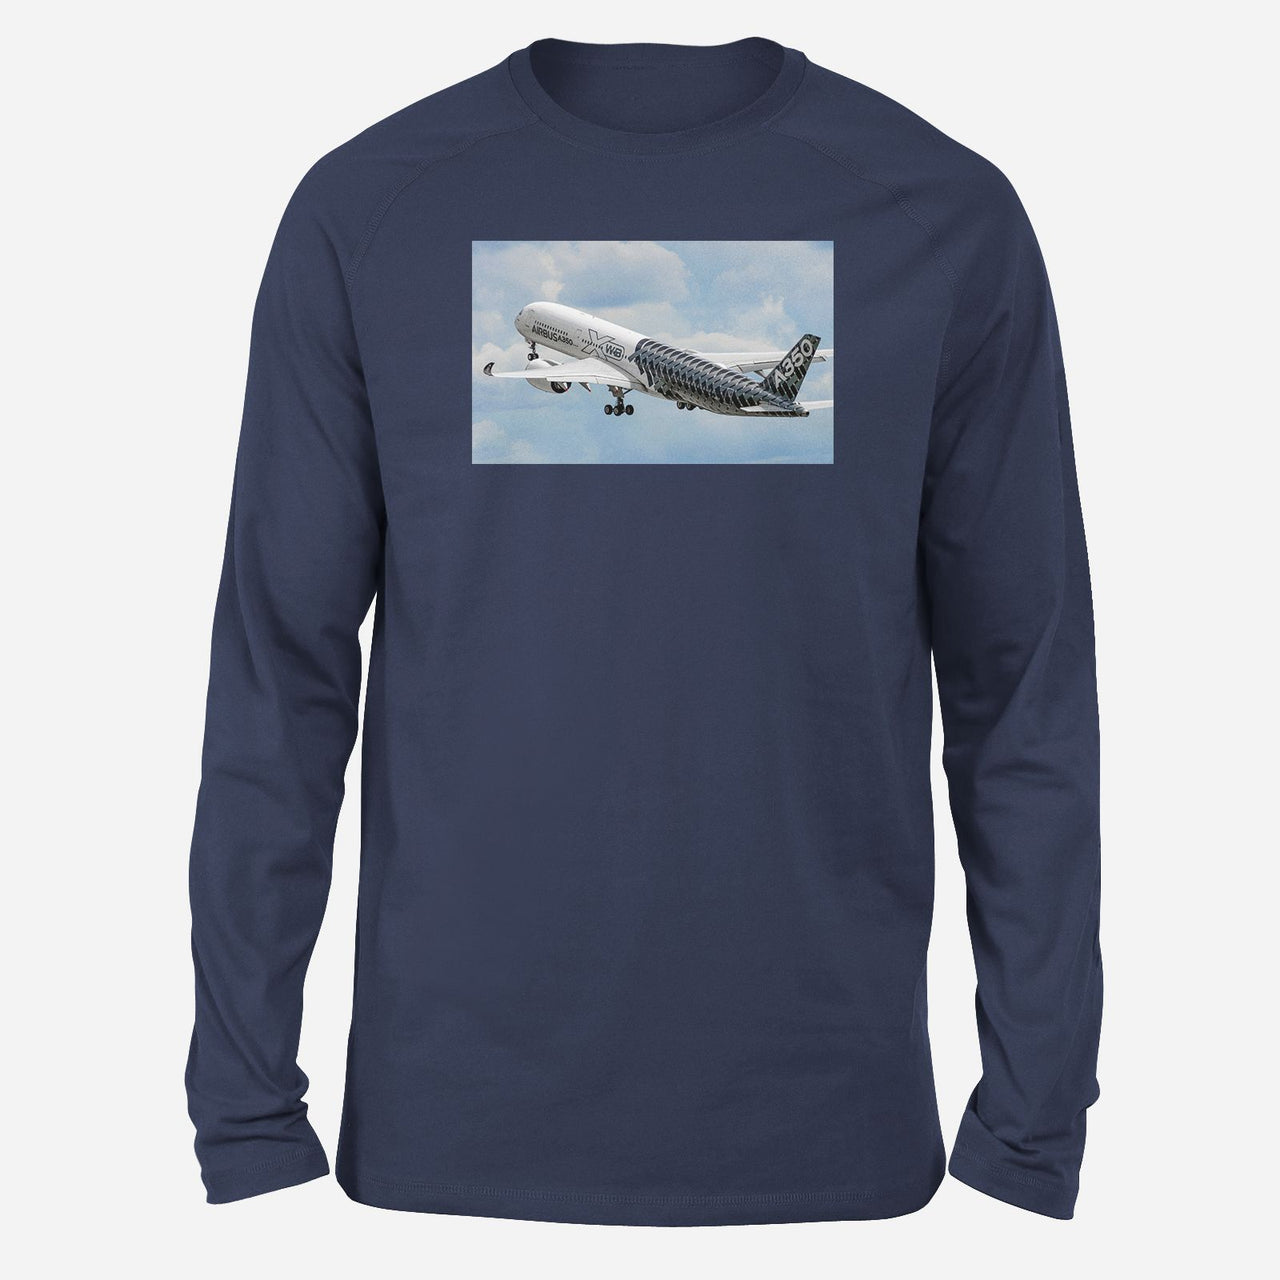 Departing Airbus A350 (Original Livery) Designed Long-Sleeve T-Shirts